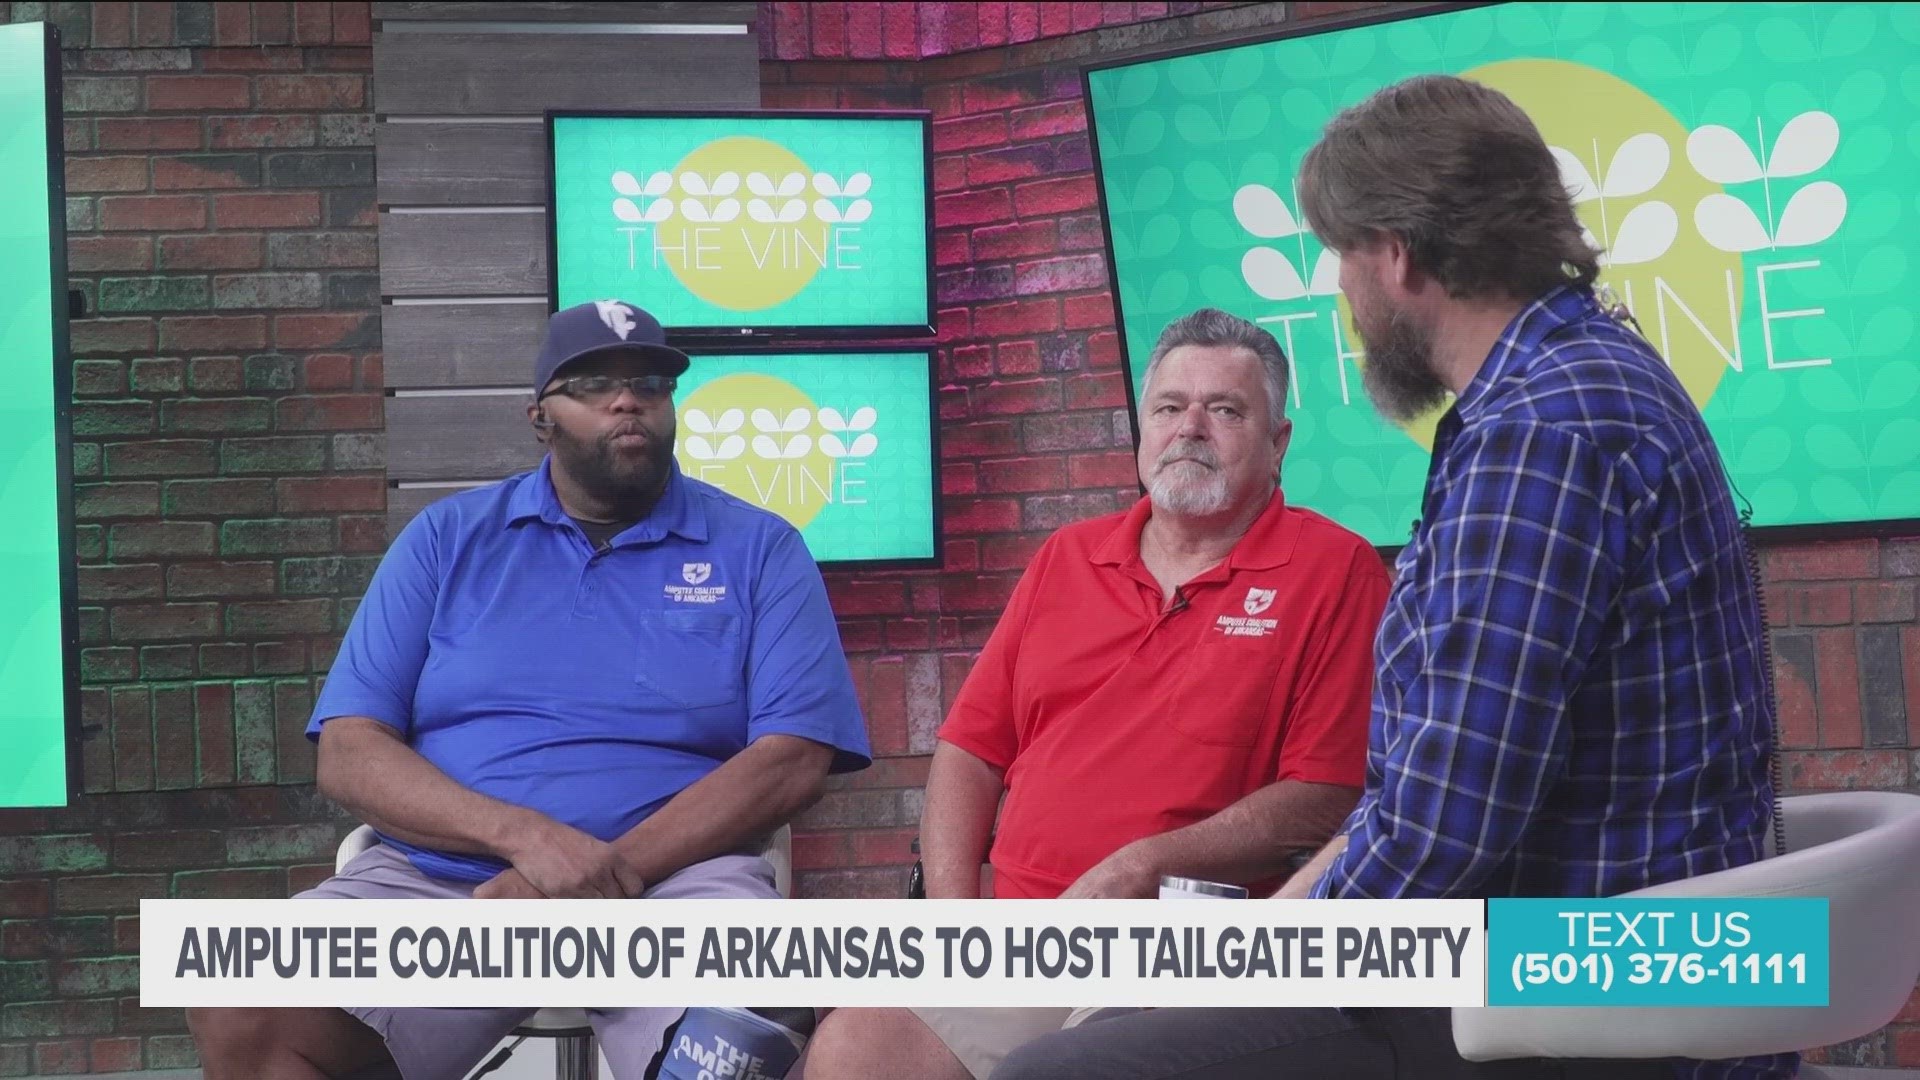 Allan and Craig from the Amputee Coalition of Arkansas tell us more about their event this weekend.